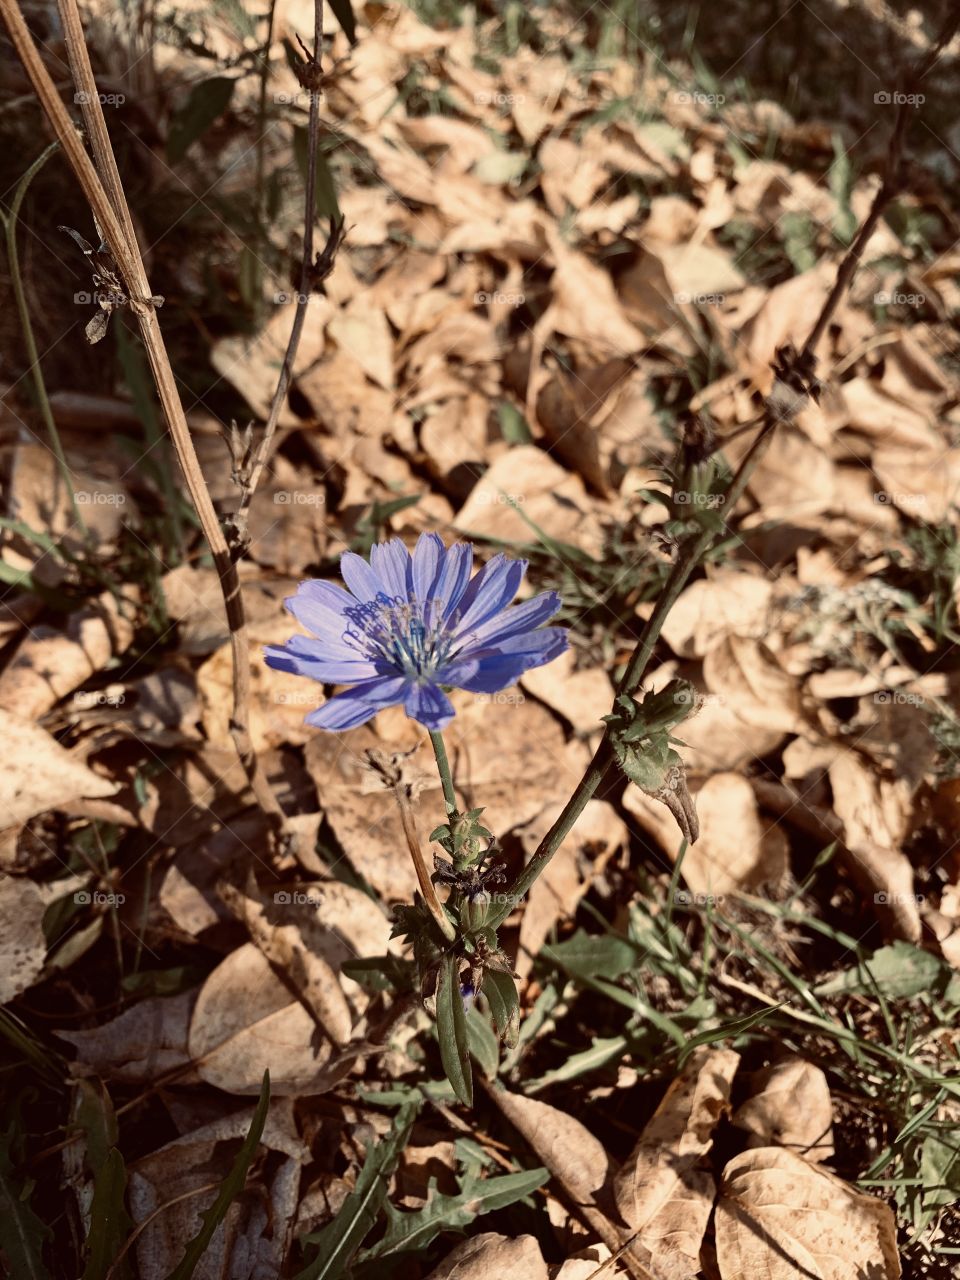 last autumn flowers among fallen leaves and dried grass. echoes of summer